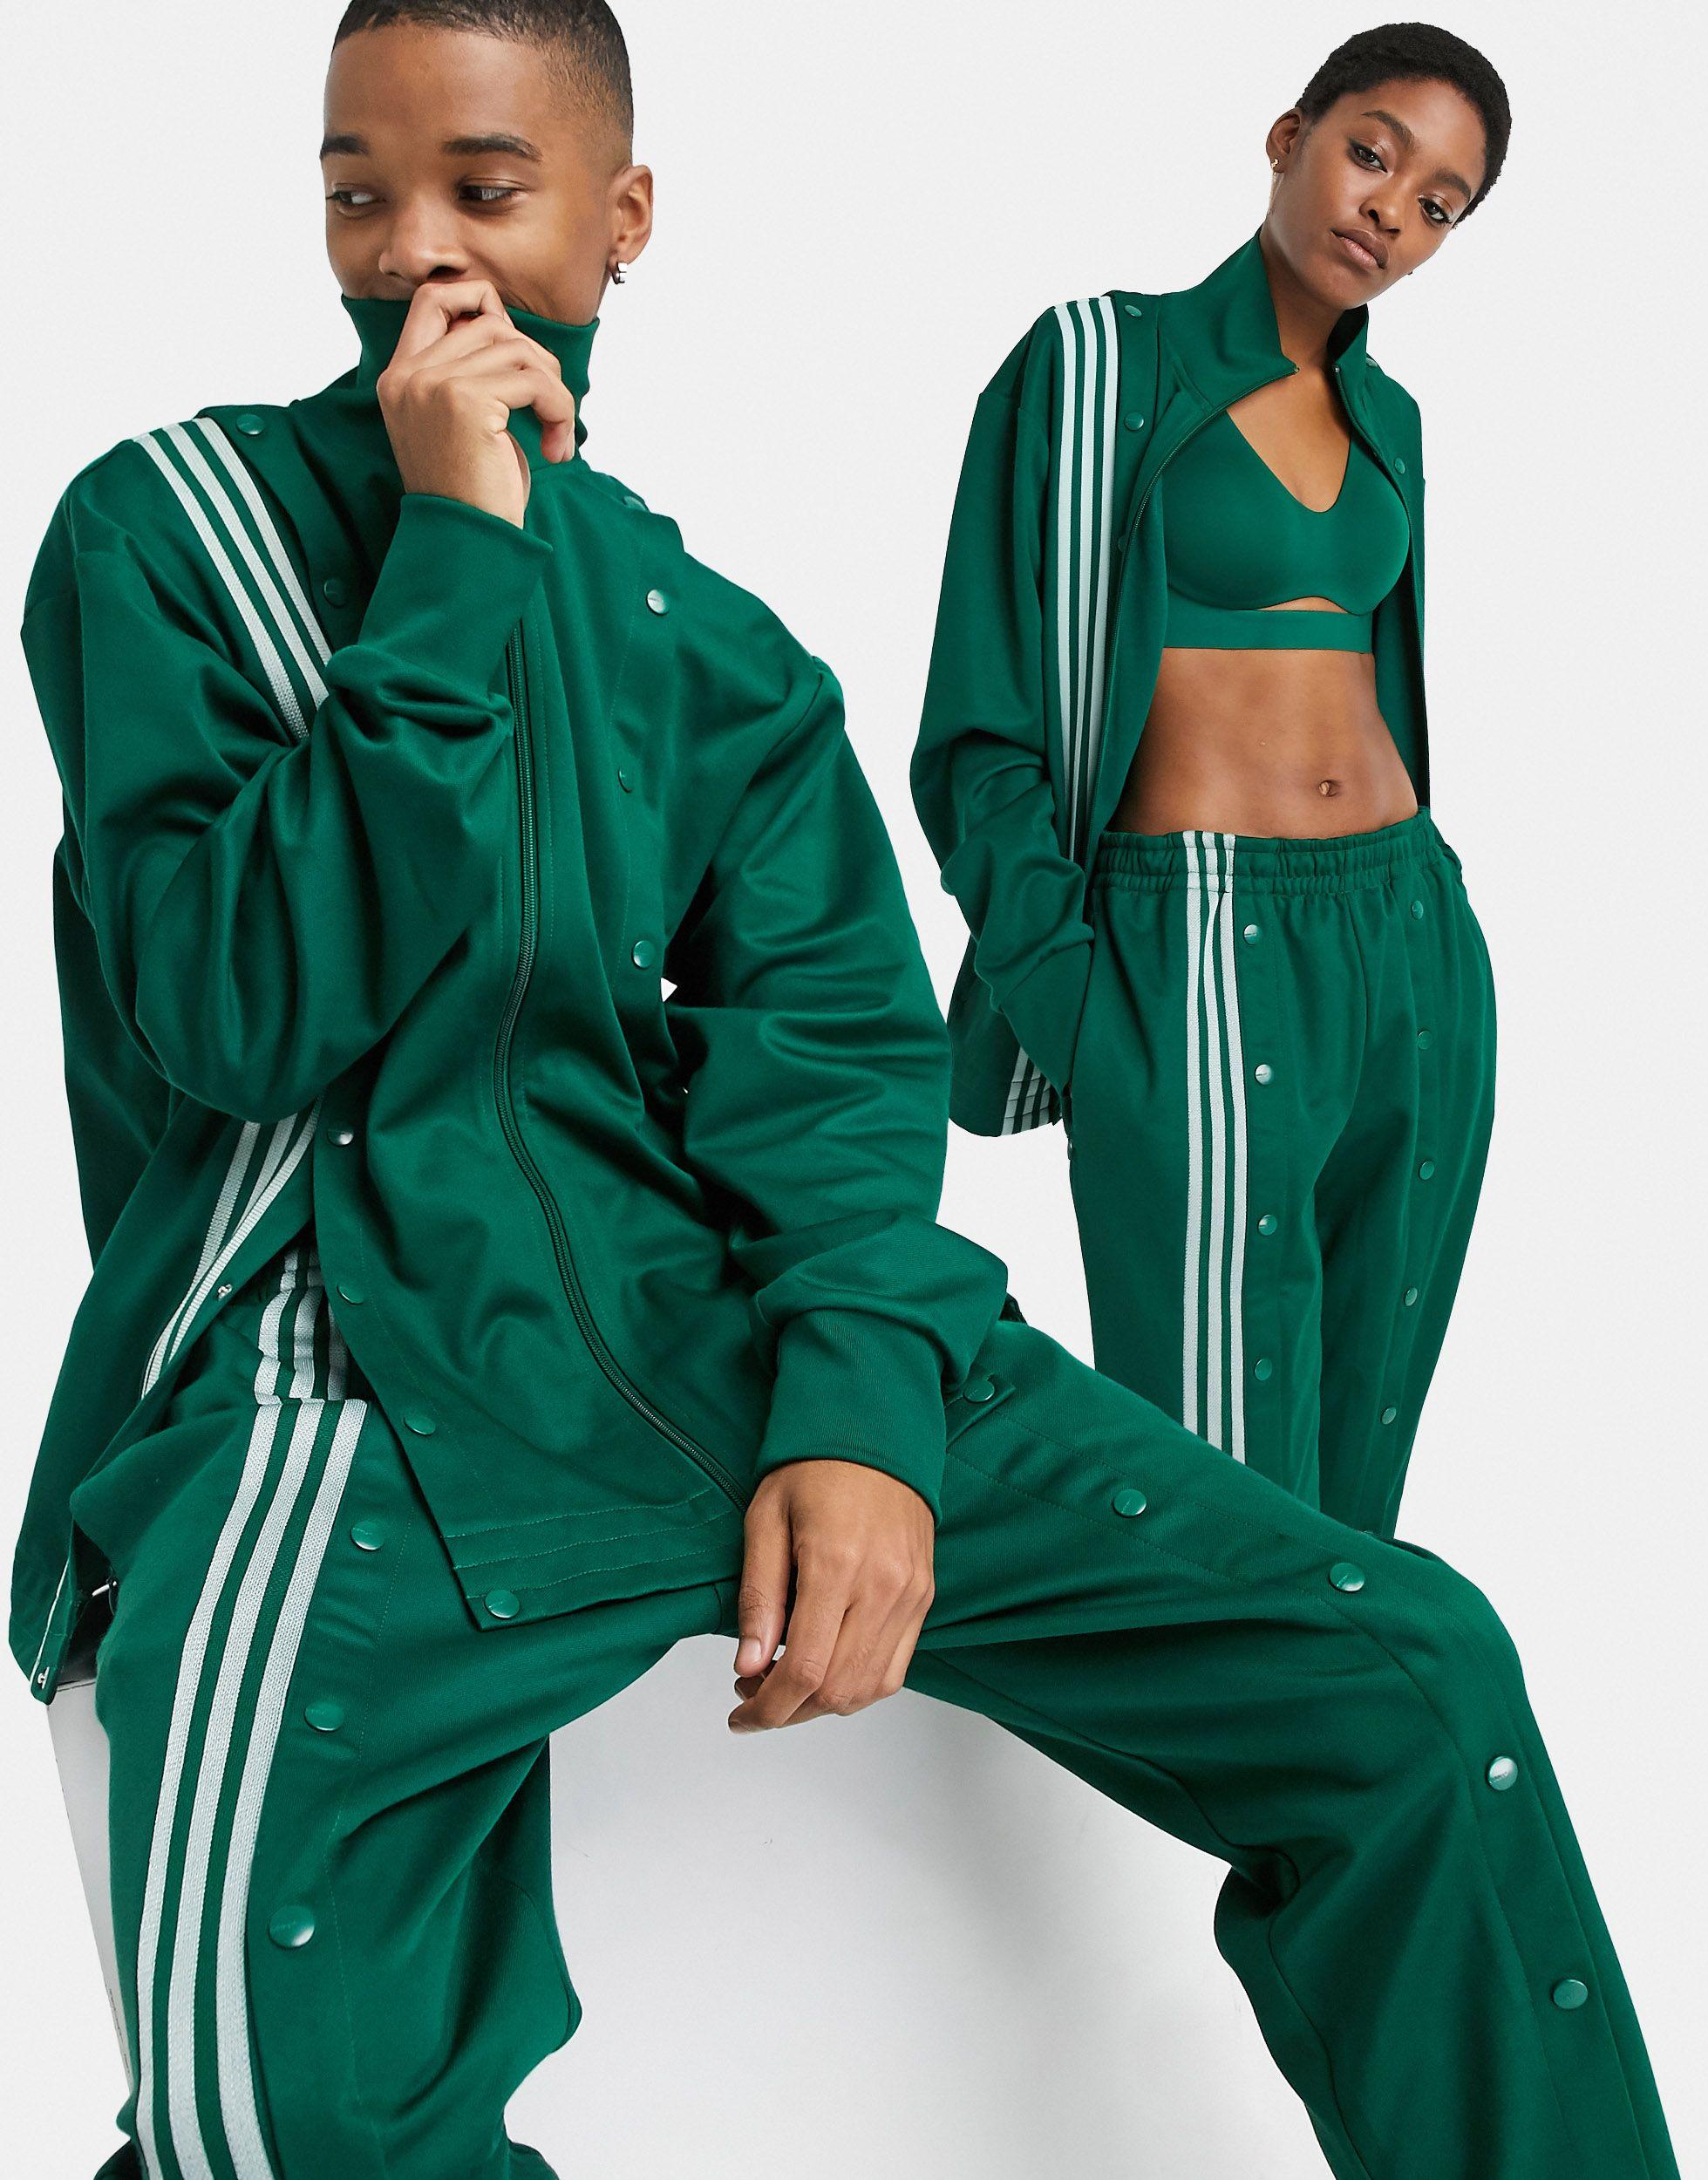 Ivy Park Adidas X Track Jacket in Green - Lyst